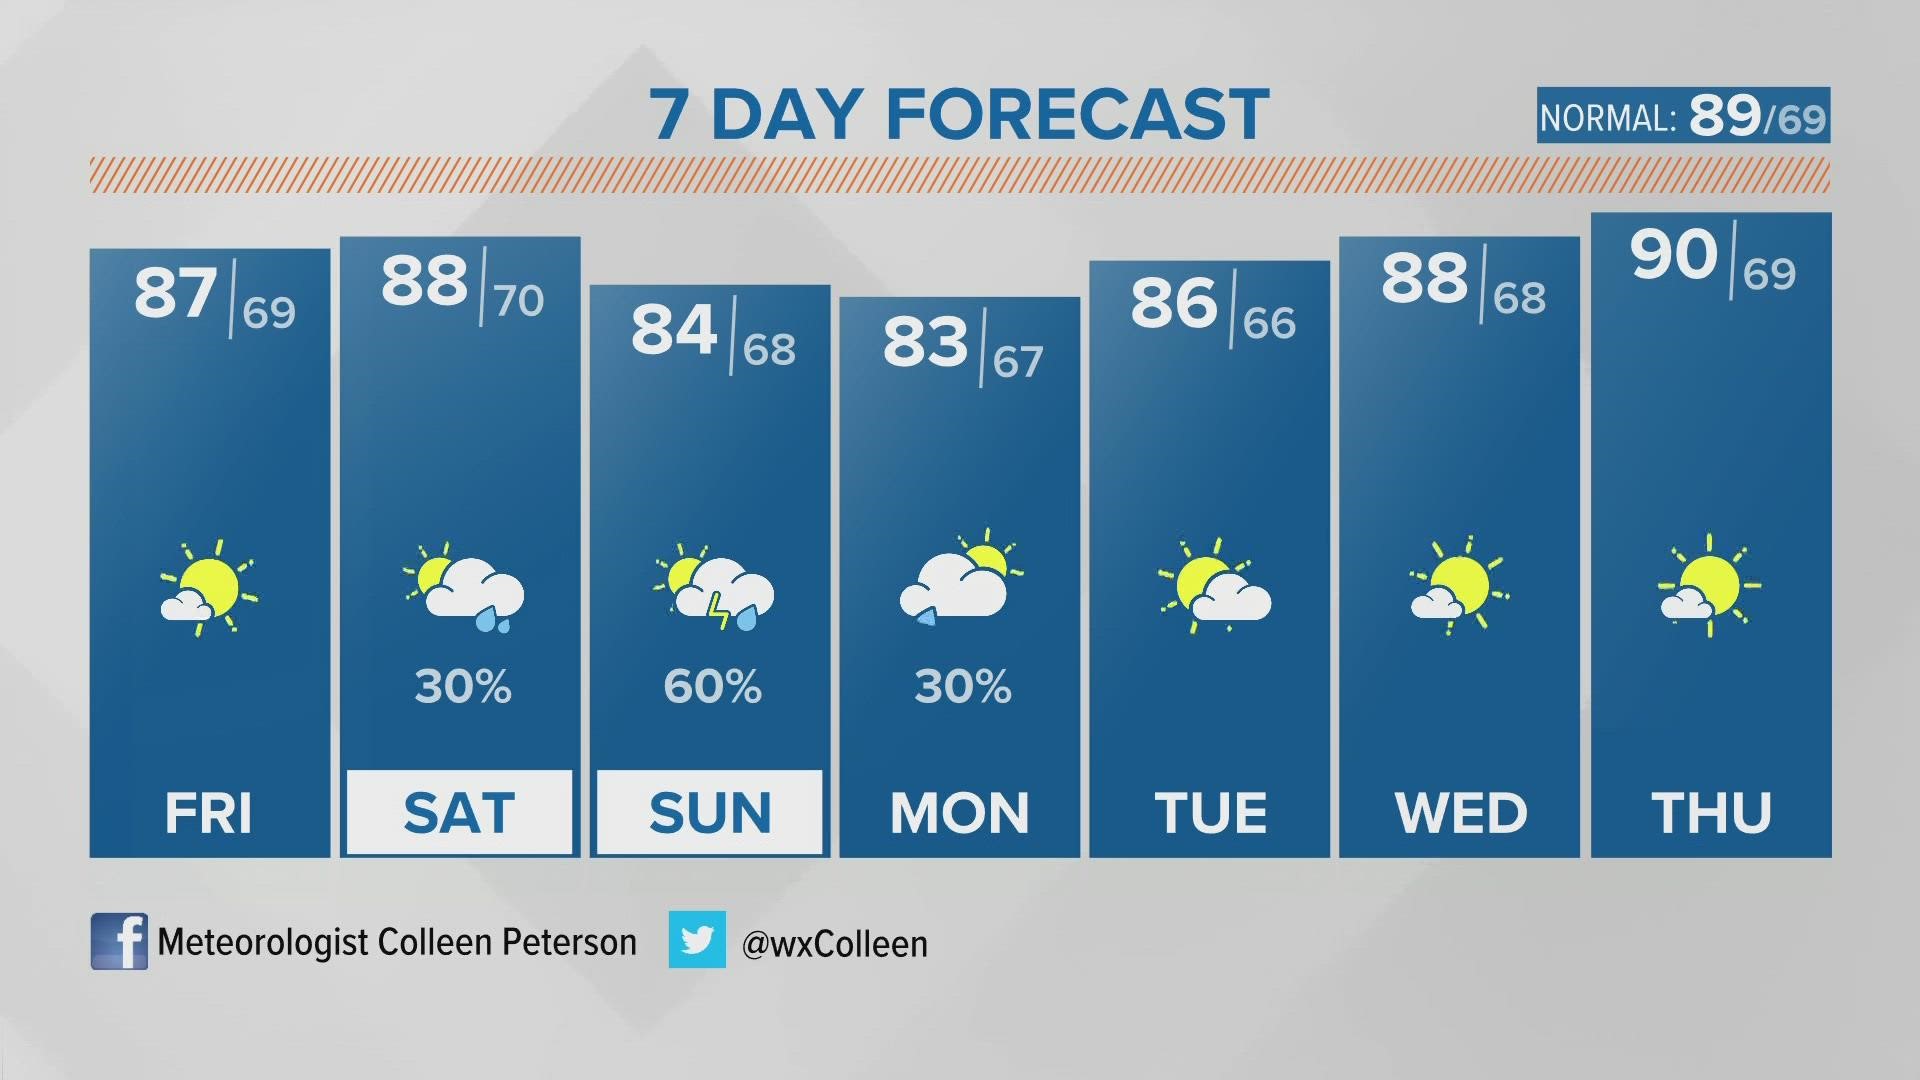 Comfortably warm again Friday, scattered storms this weekend.